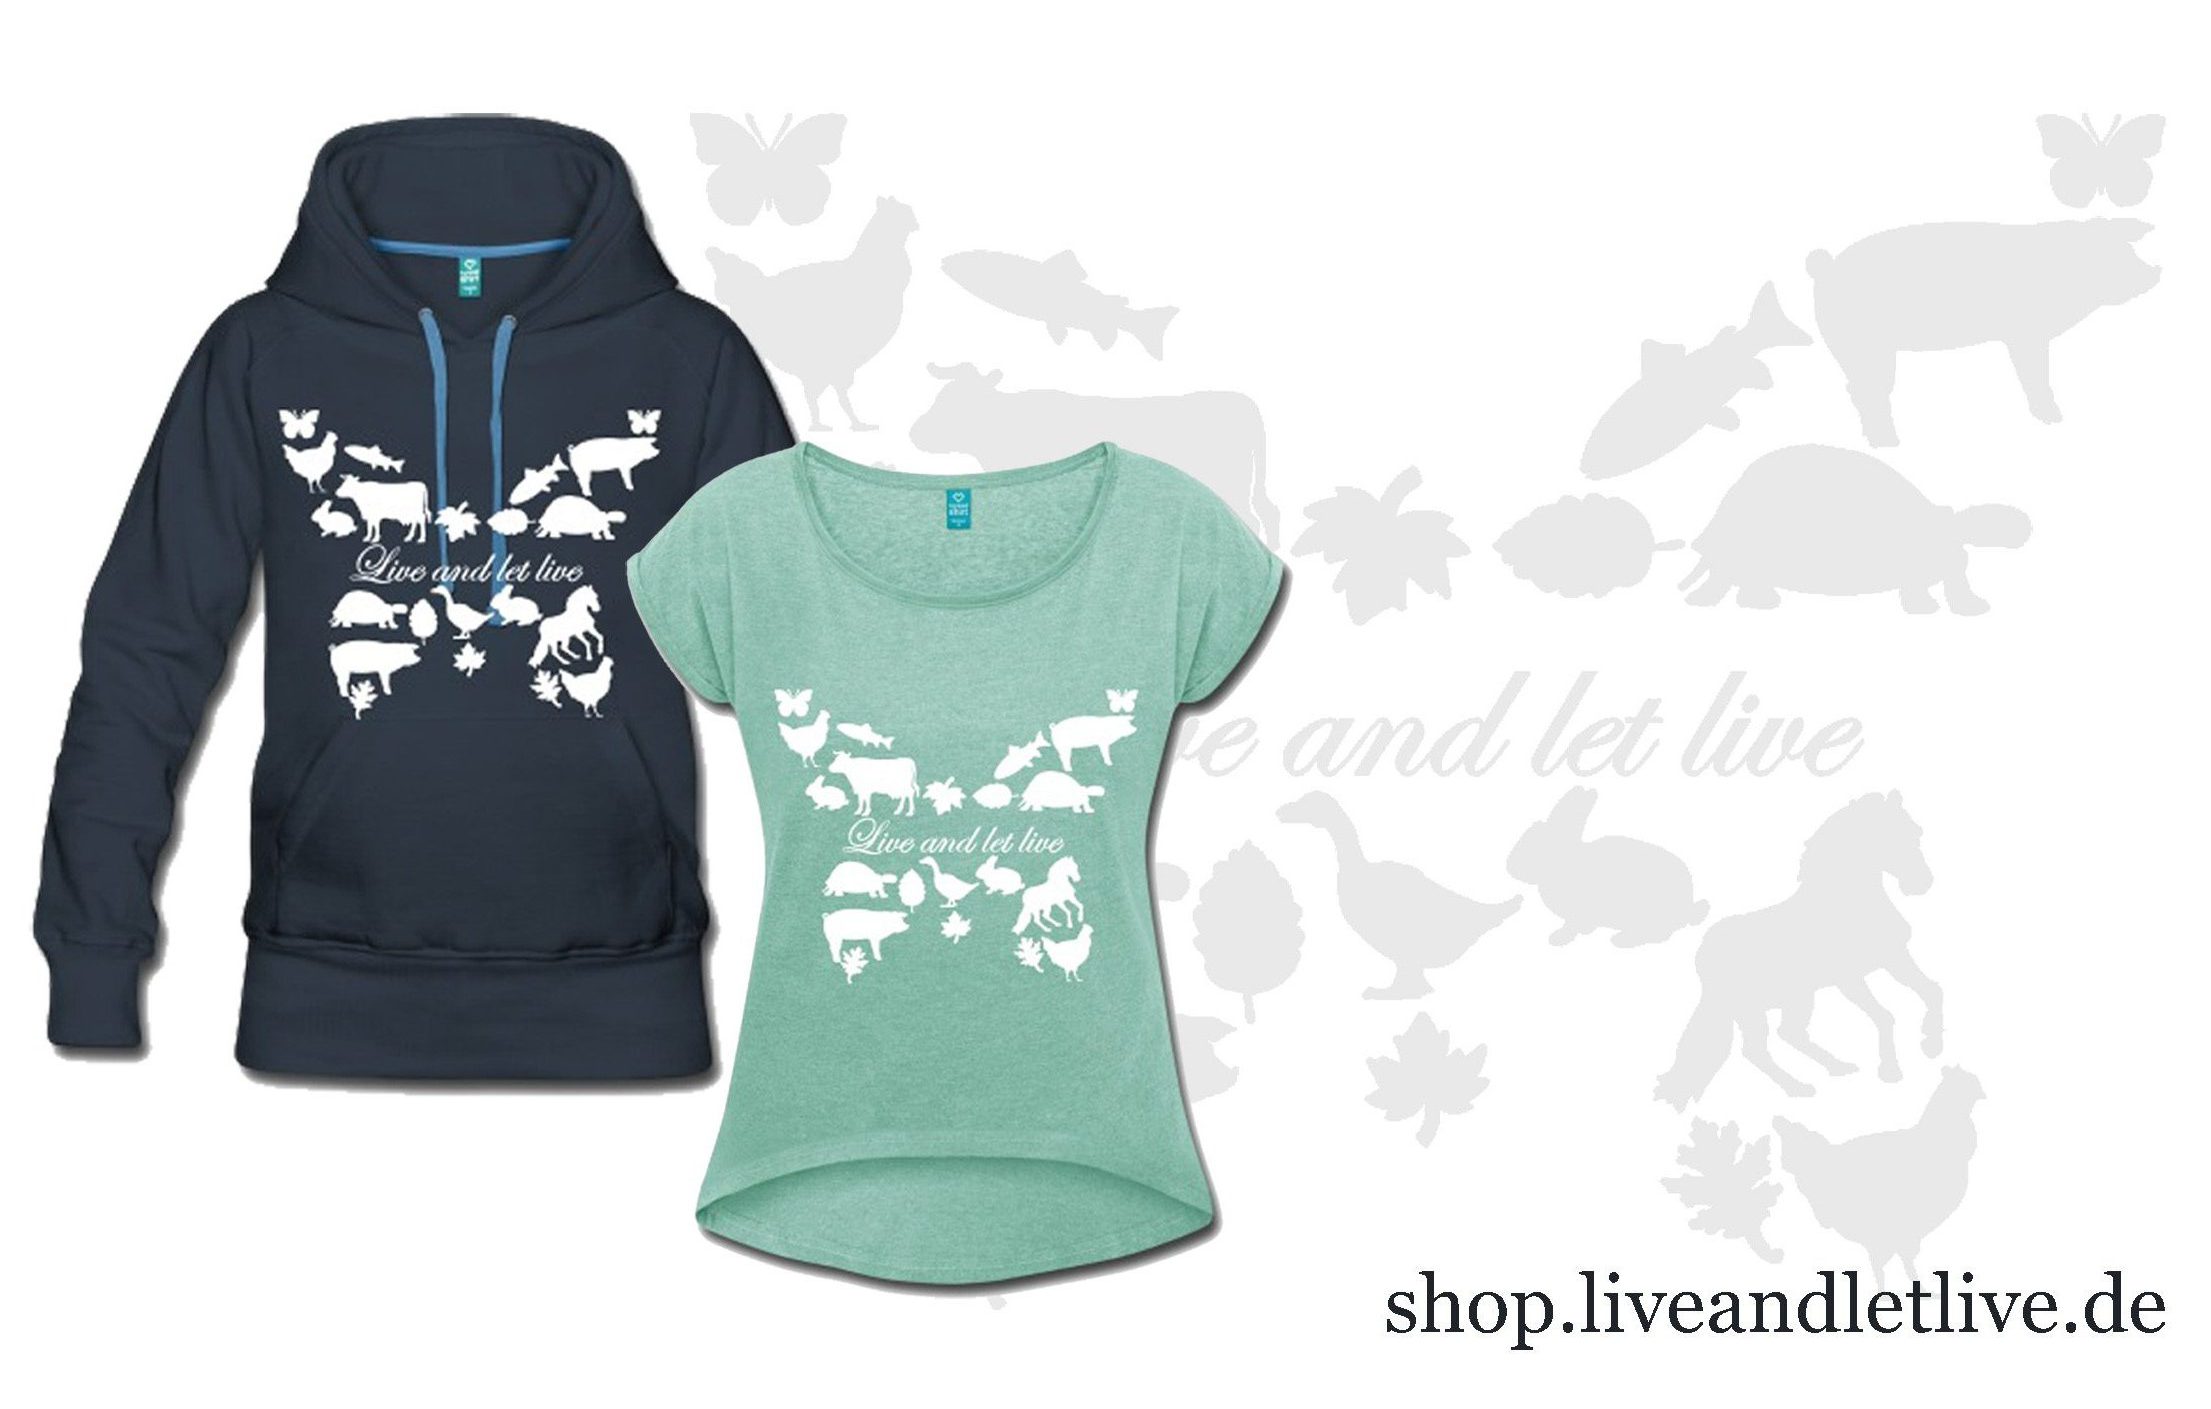 Live and let live vegane Message Shirts